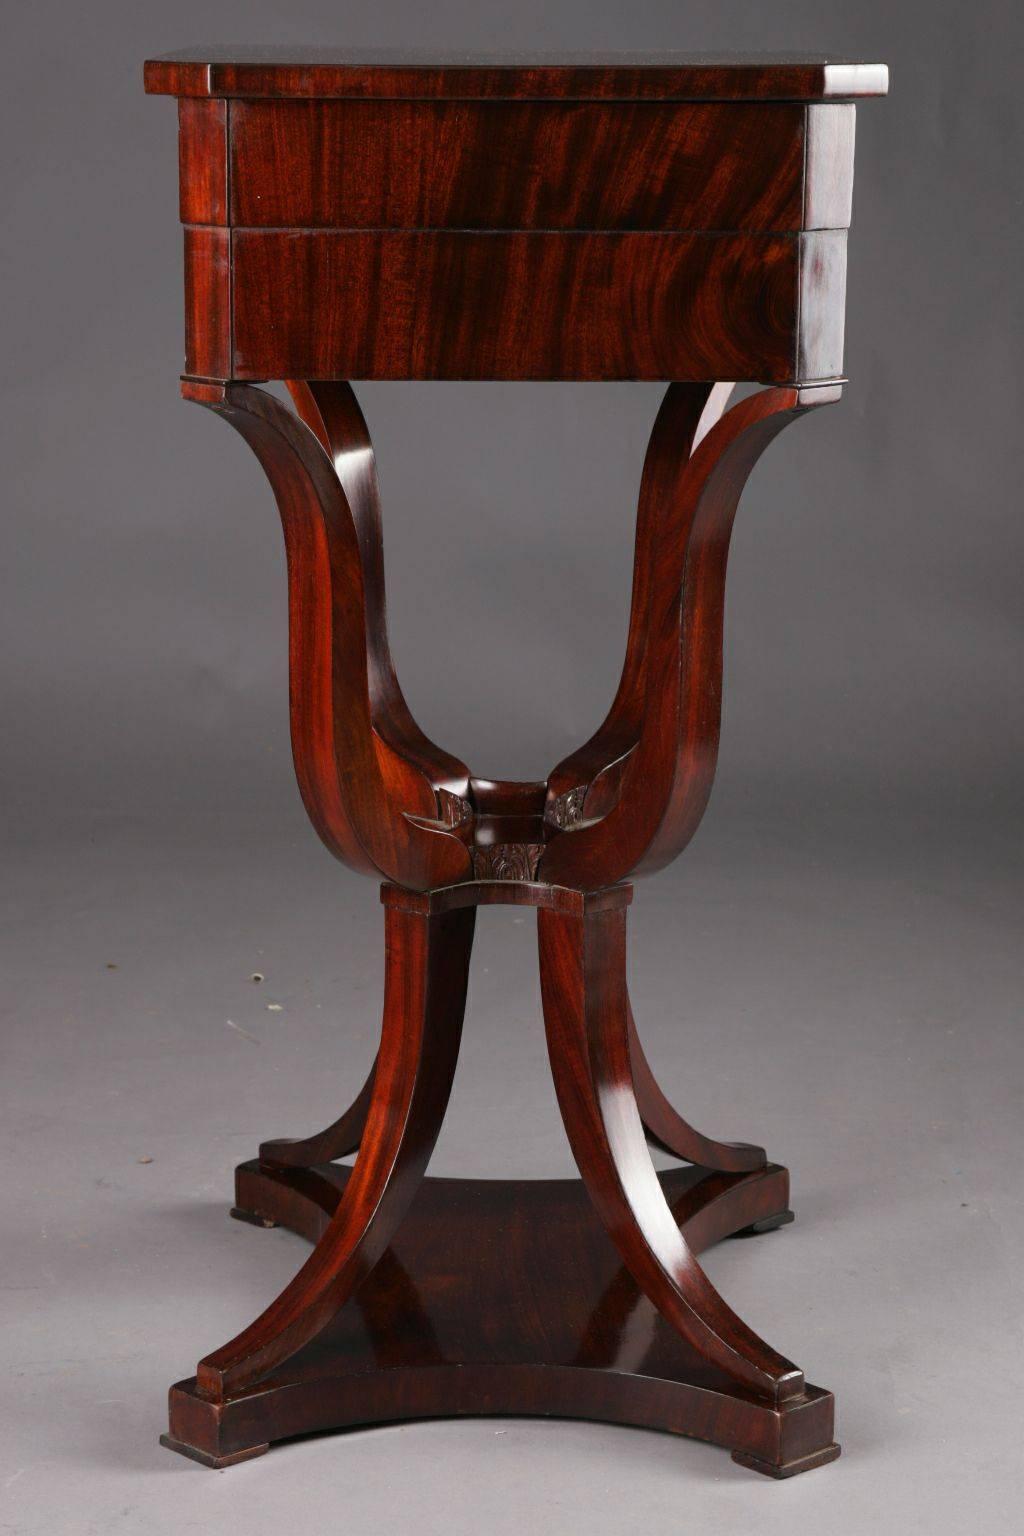 Highly interesting Biedermeier sewing table, circa 1820.
Mahogany on solid beechwood. On strongly curved cross-legged legs, joined by a slightly interlacing intermediate part, and then saber-shaped legs on the four-legged, base plate on disc feet.